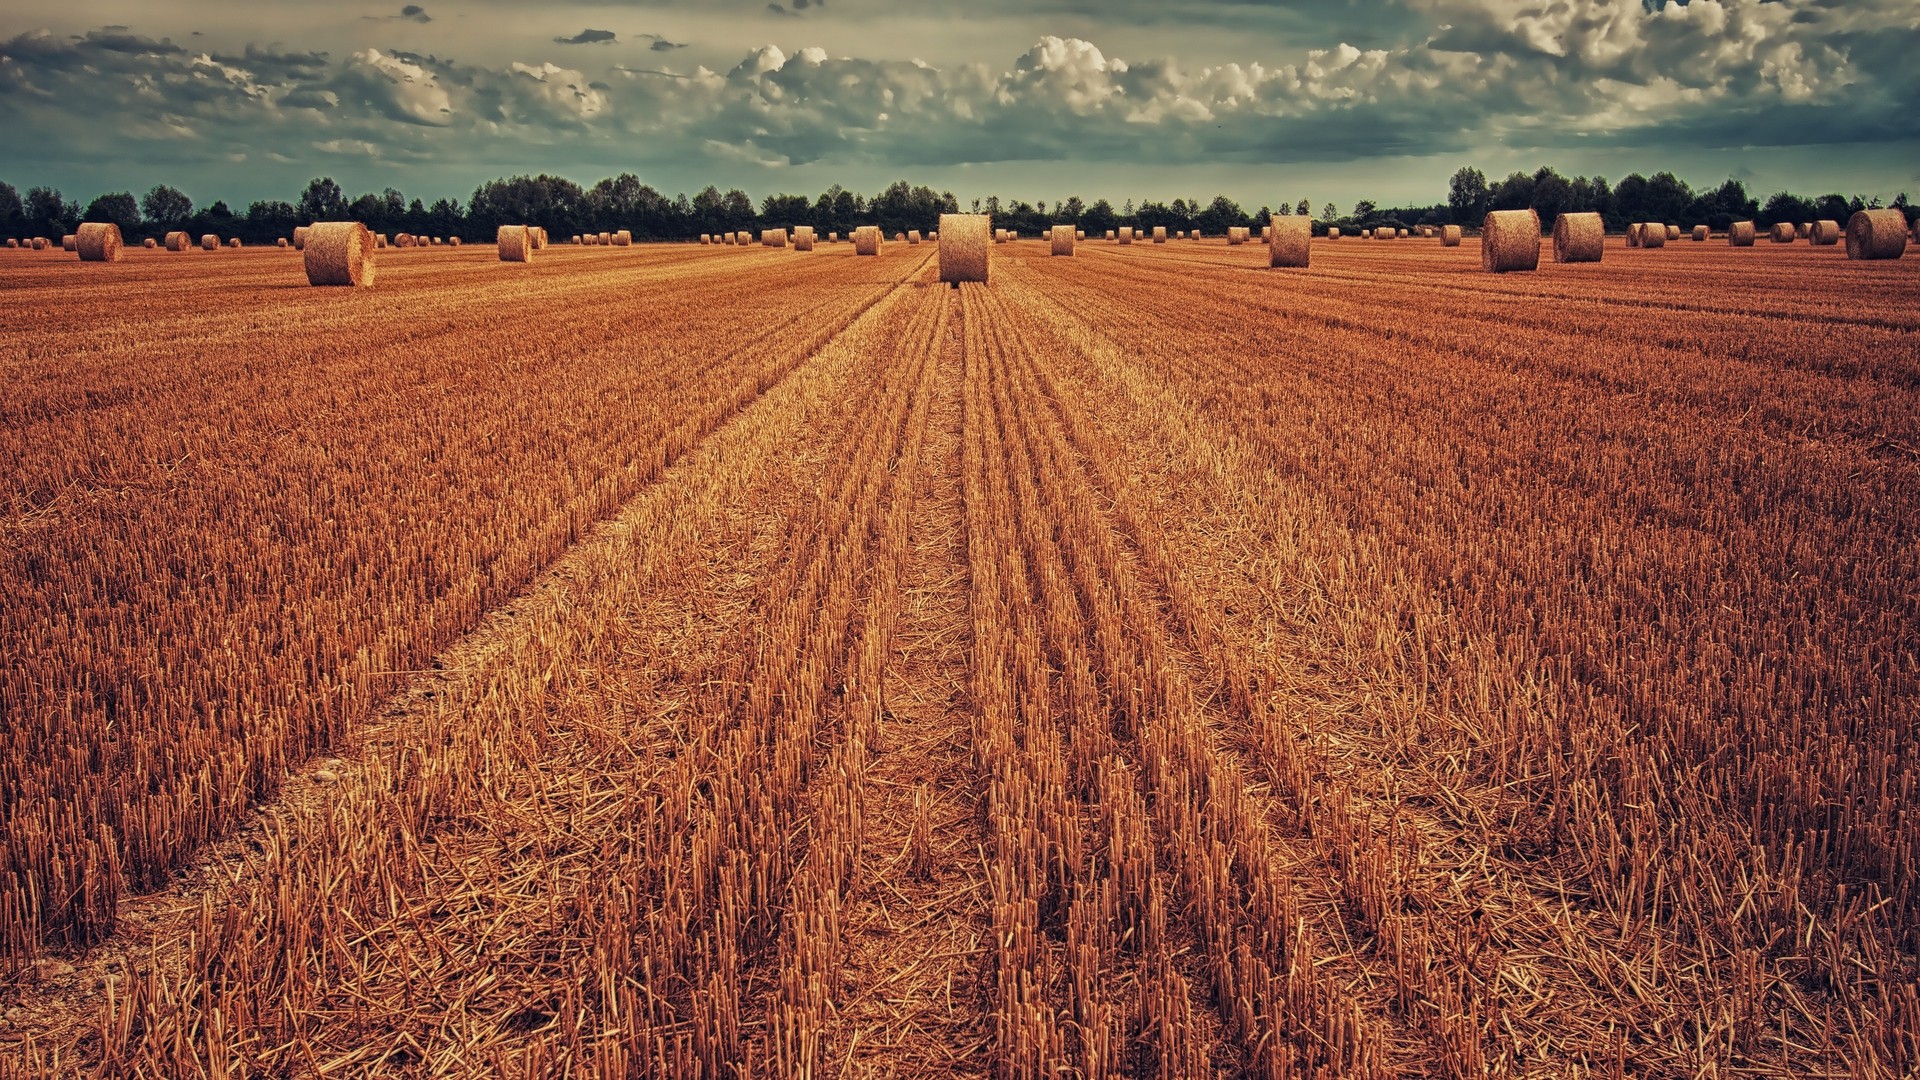 1920x1080 wallpapers: field, crop, wheat, hay, fascinating (image)